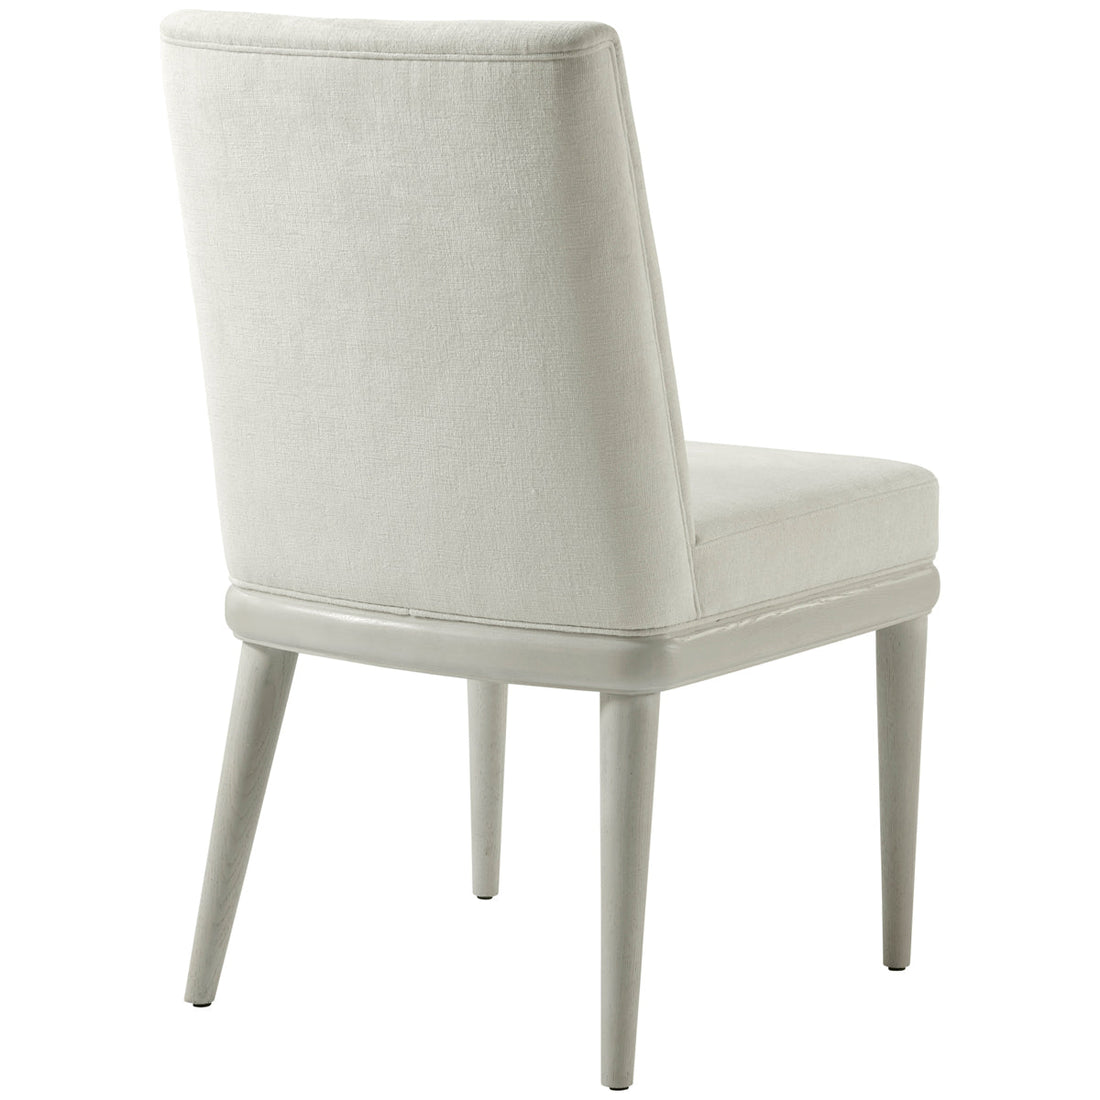 Theodore Alexander Essence Upholstered Dining Side Chair, Set of 2